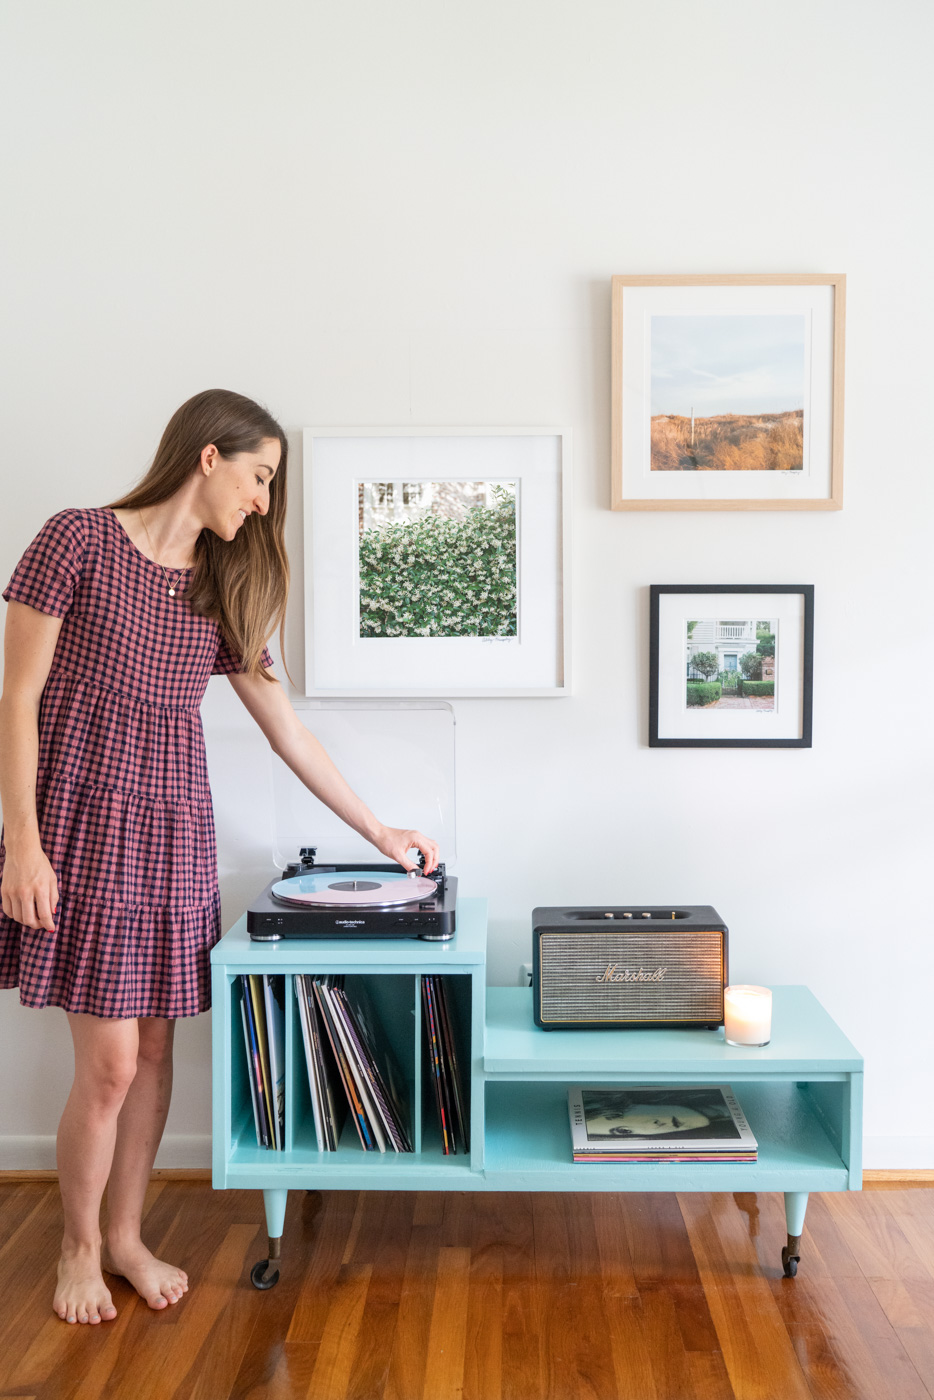 Three framed photographs of scenes in Charleston, South Carolina hanging above a mid-century modern record player table. A woman stands to the left side putting a record on the record player